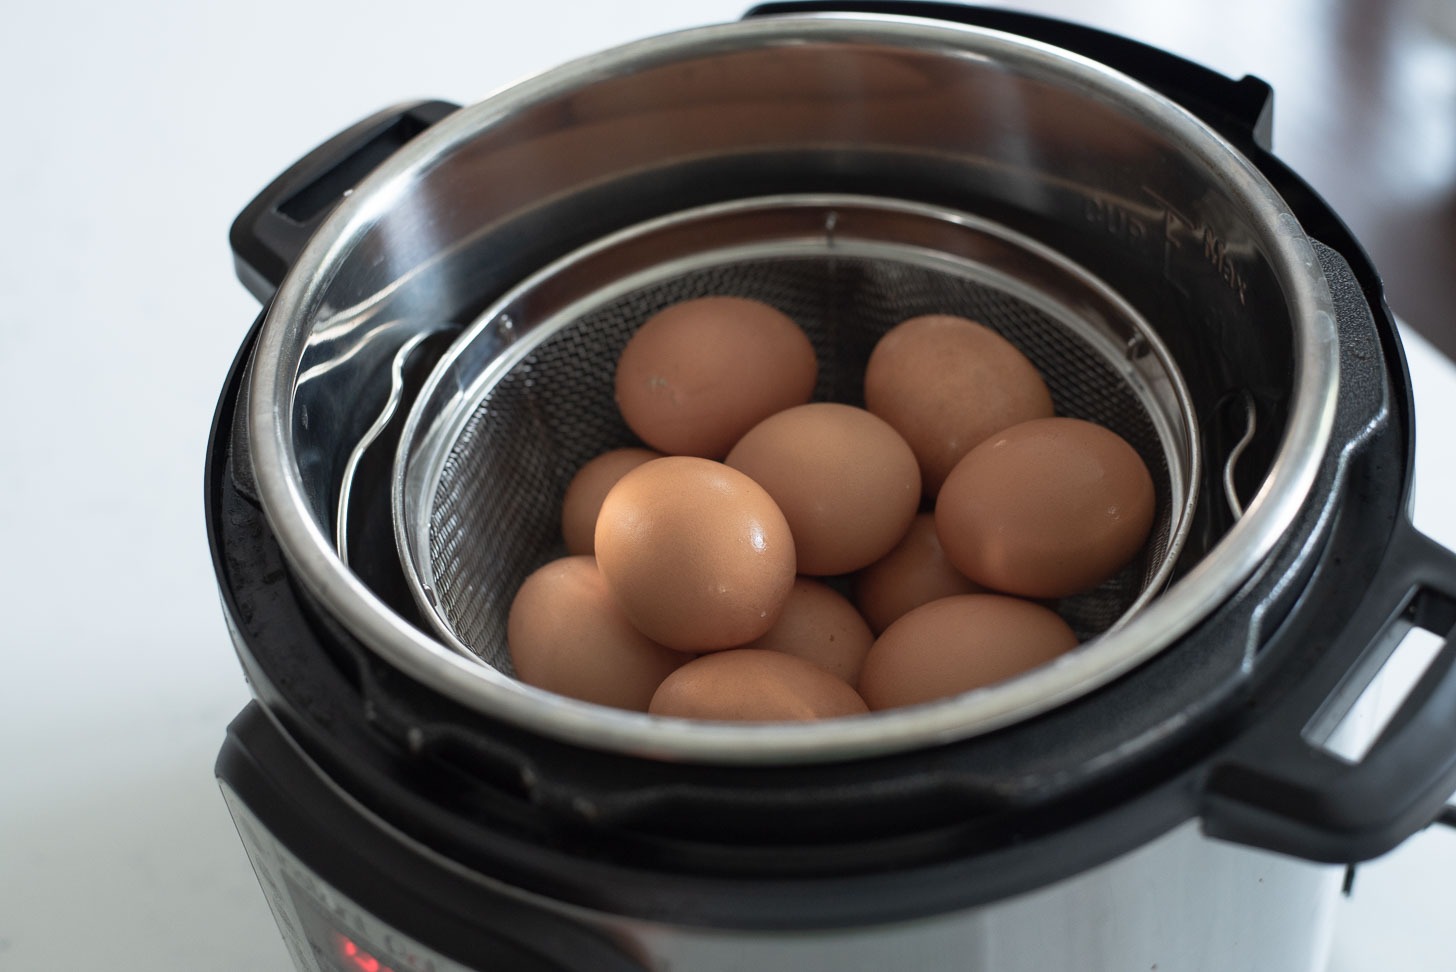 Brown eggs are placed in a mesh strainer inside the instant pot.